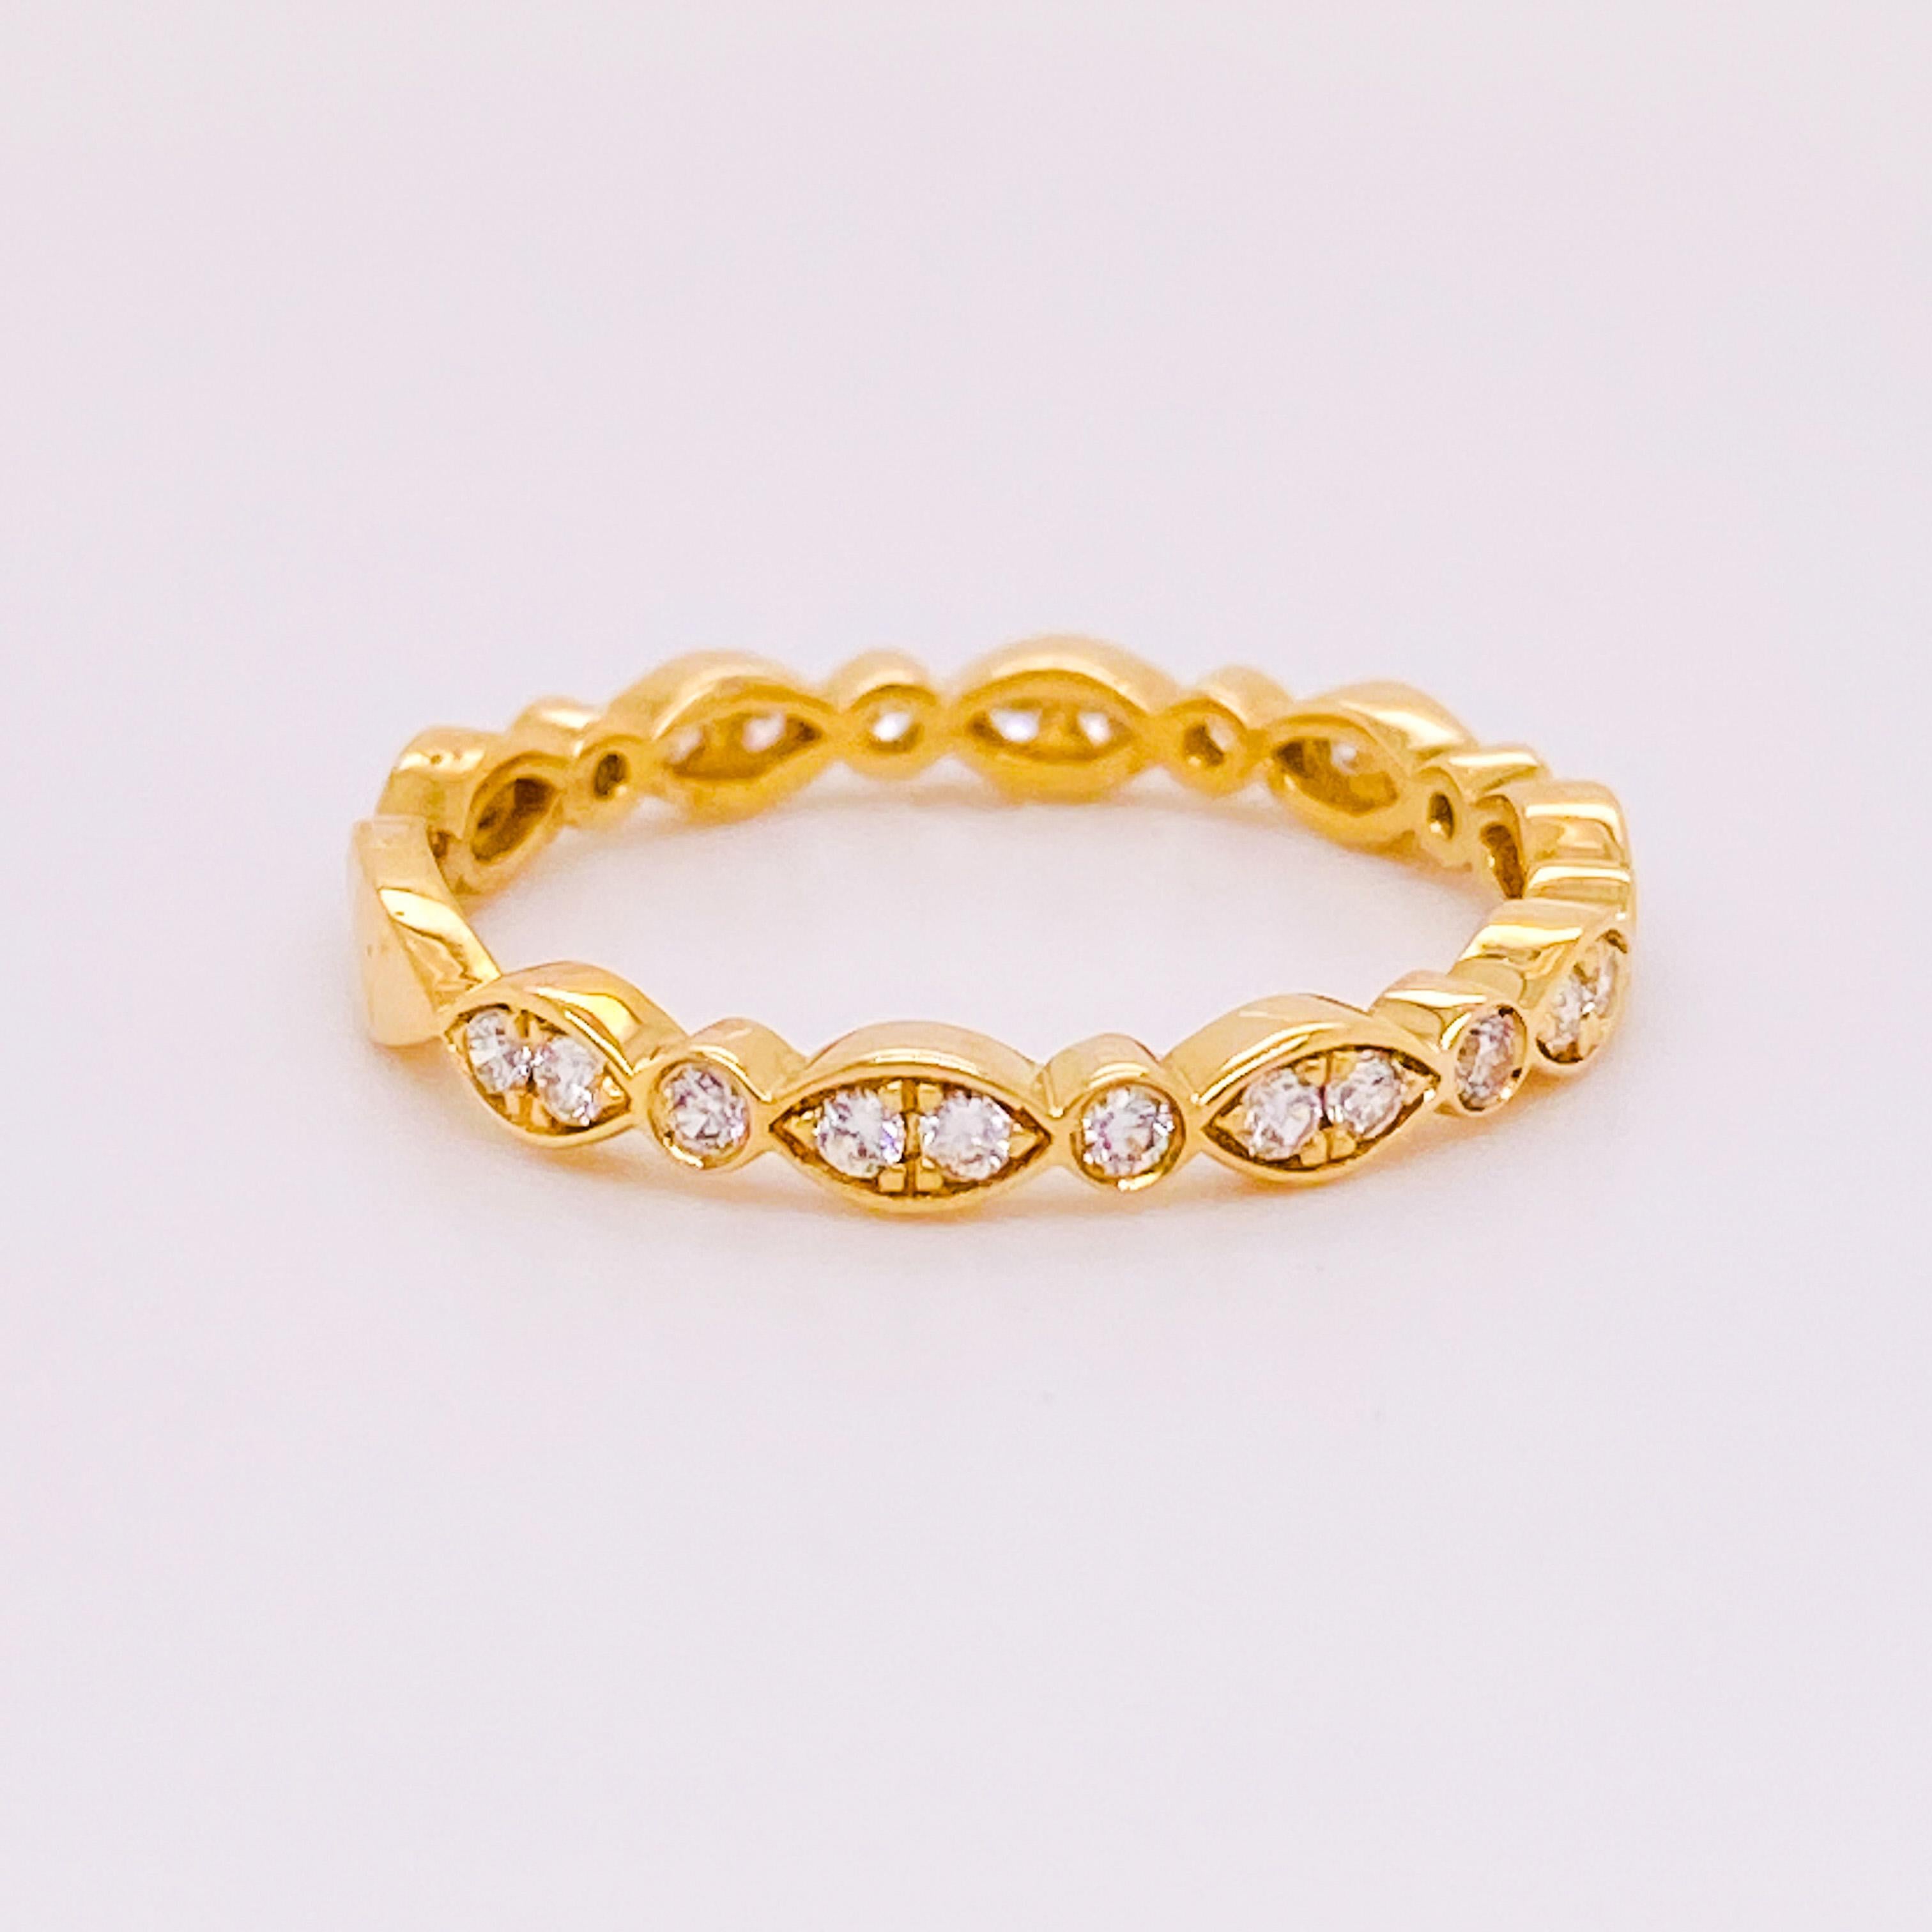 This diamond band is a gorgeous style that has a round and marquise shape alternating.The band is 14 karat yellow and has diamonds going 3/4 the way around the ring. The ring is gorgeous by itself or when stacked with other bands. The diamonds are